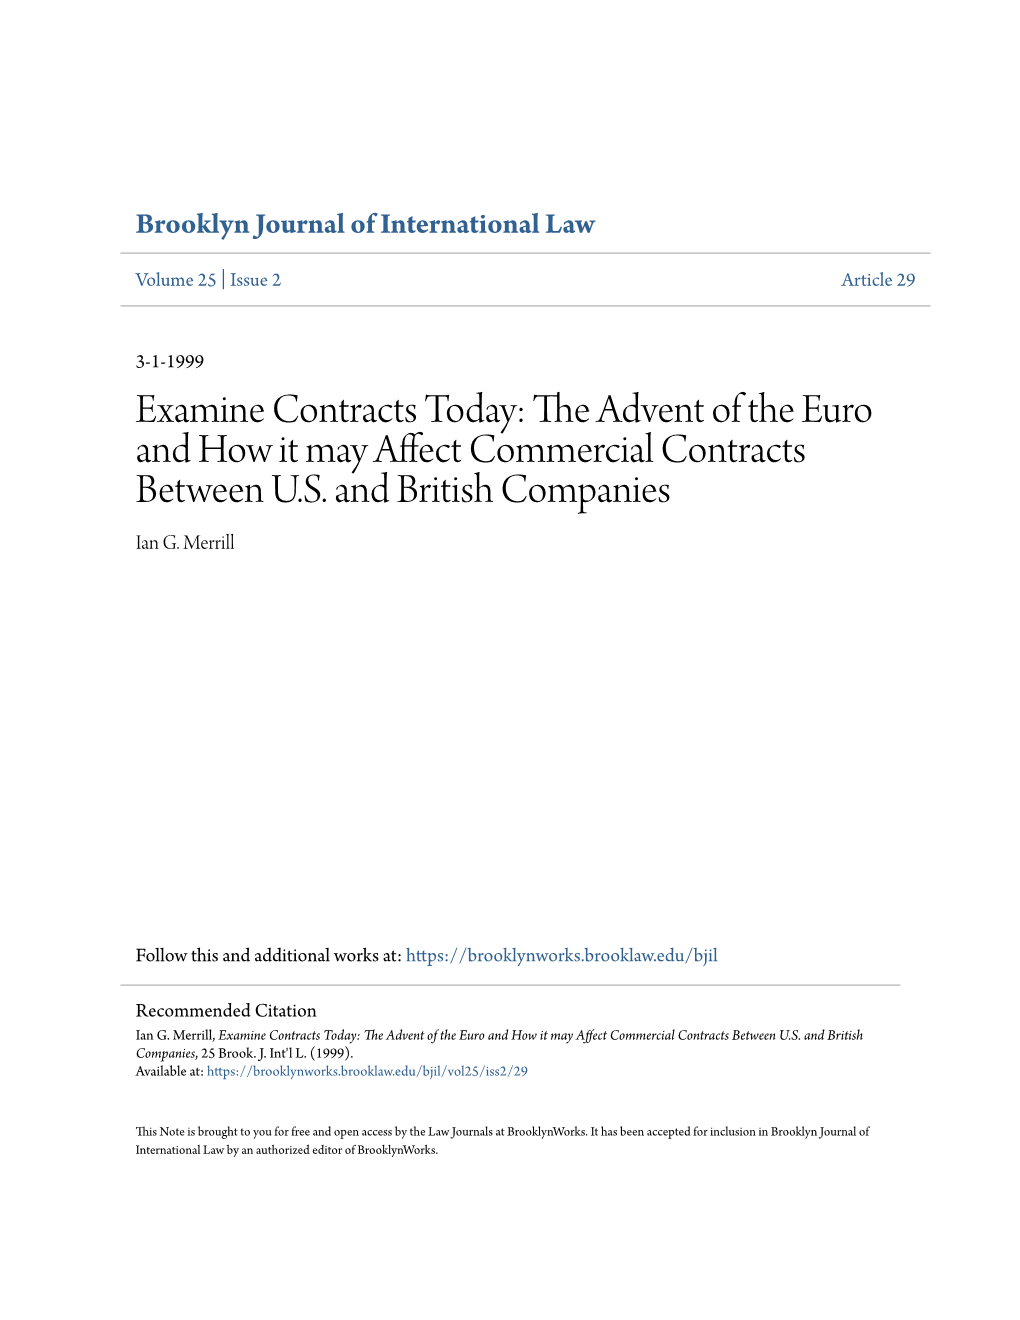 Examine Contracts Today: the Advent of the Euro and How It May Affect Commercial Contracts Between U.S